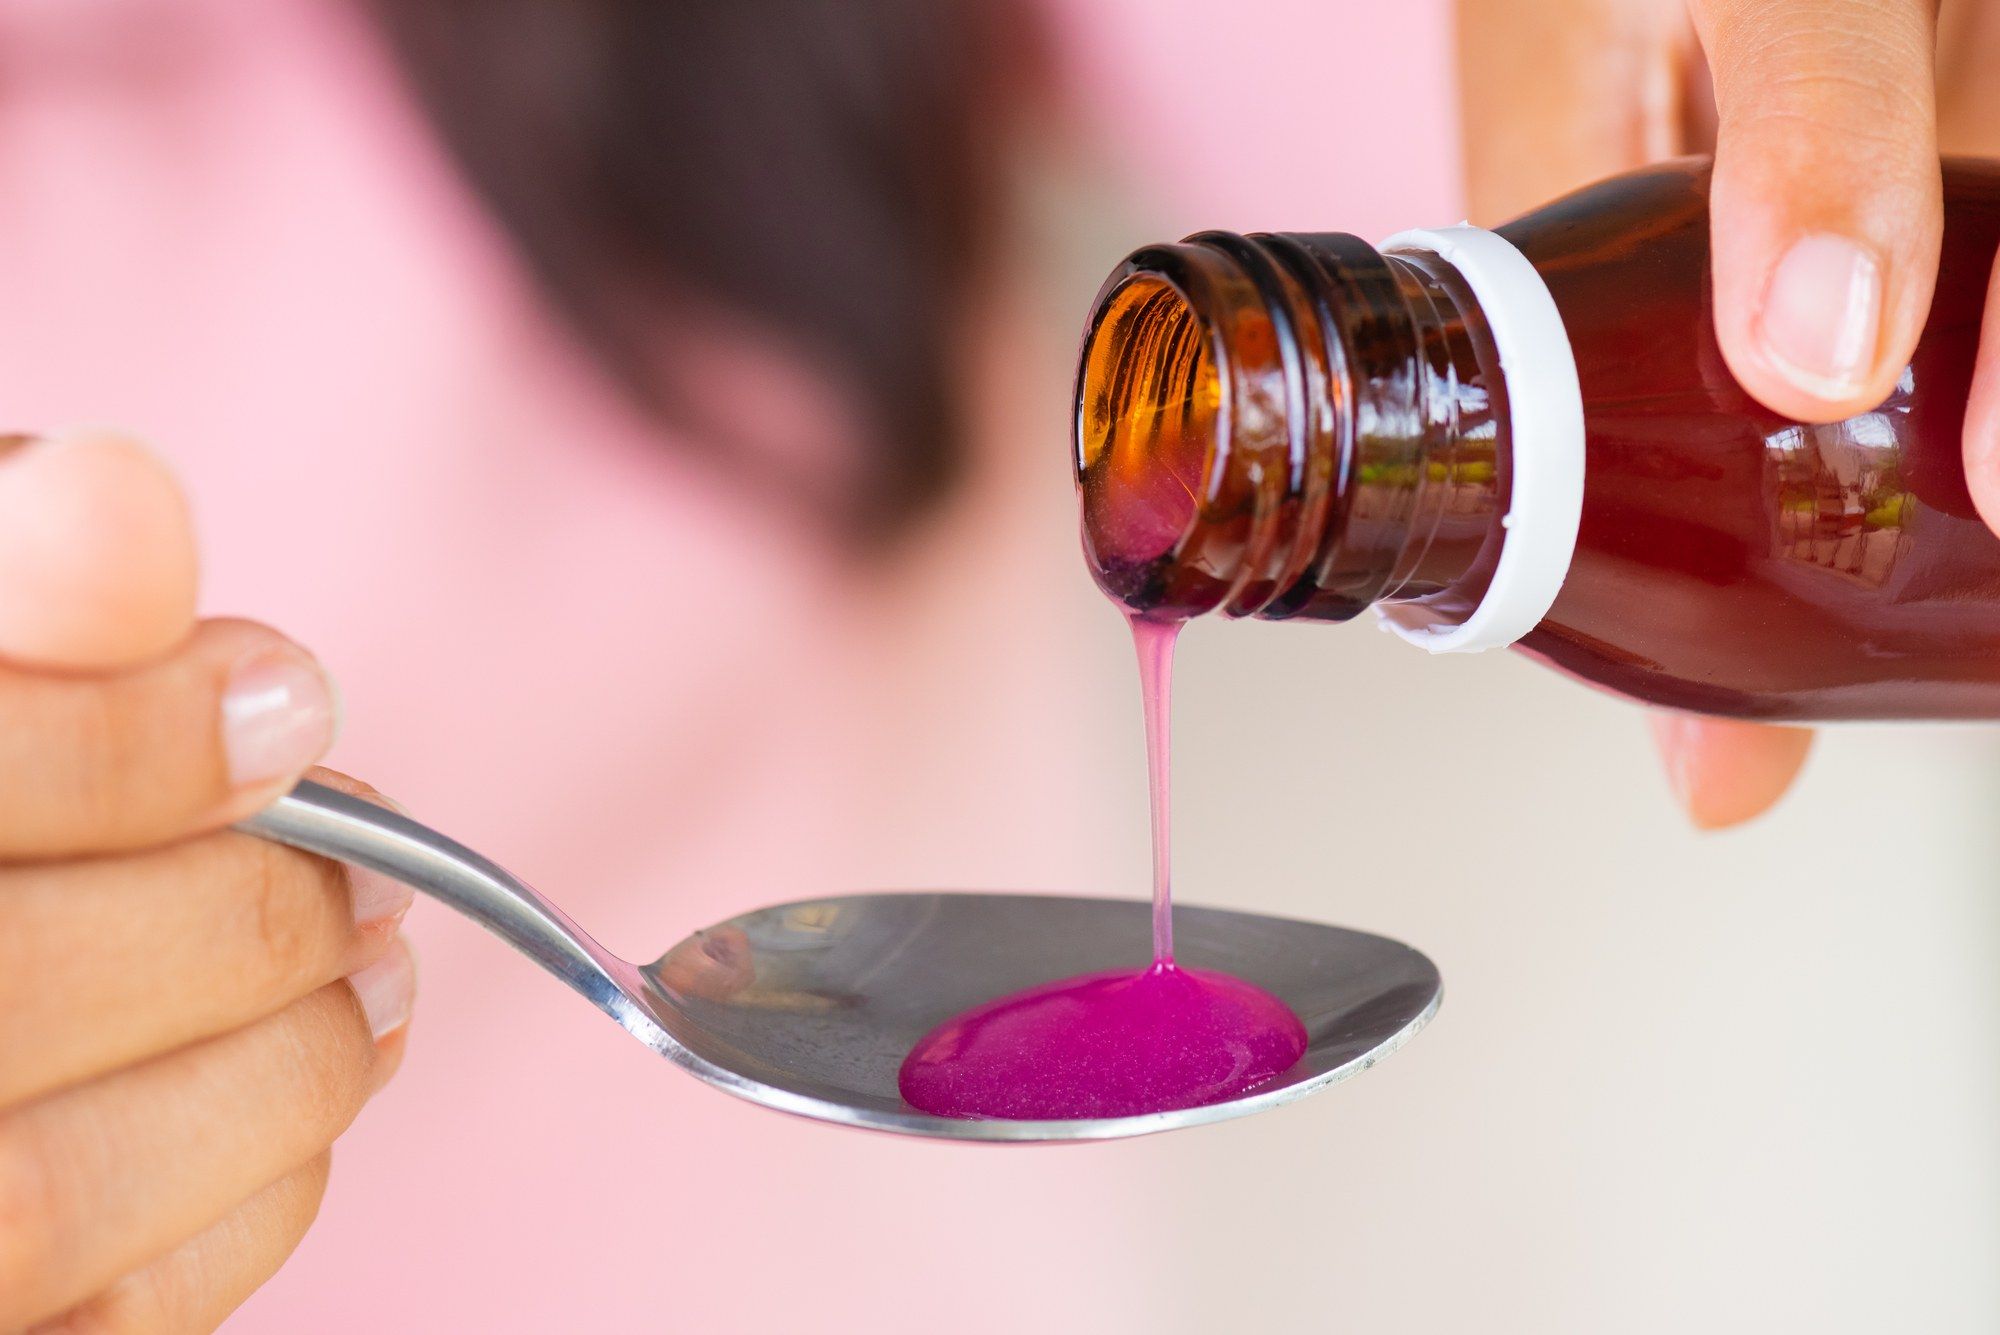 Zarbee's Cough syrup is not natural, a class action lawsuit claims.